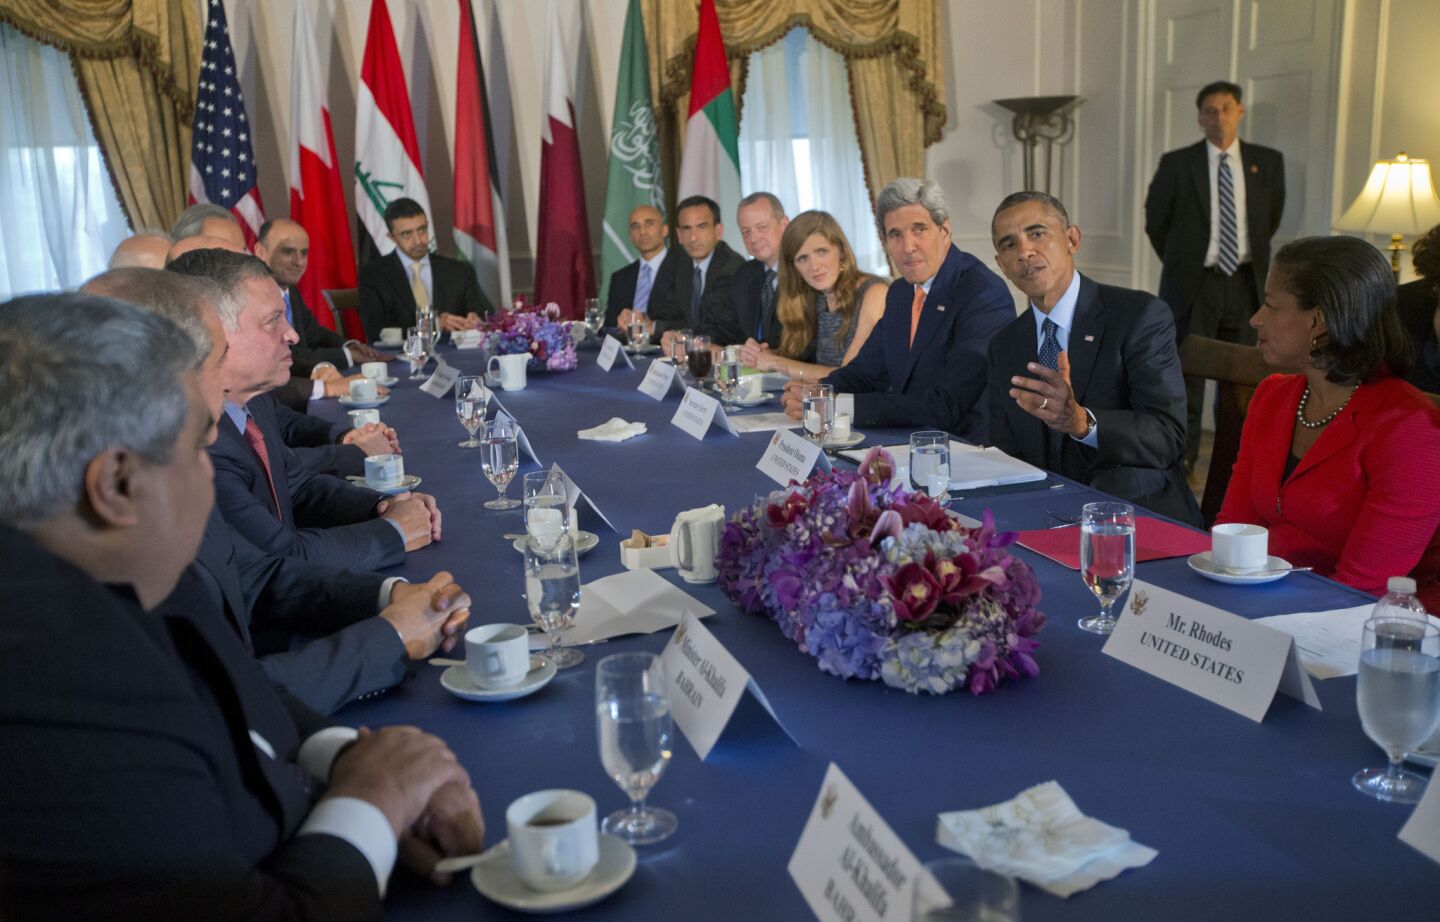 President Obama, accompanied by Secretary of State John F. Kerry, national security advisor Susan Rice, right, and U.S. Ambassador to the U.N. Samantha Power, meets with the representatives of Bahrain, Qatar, Saudi Arabia, Jordan, United Arab Emirates and Iraq, in New York. Obama met with the five Arab nations that participated in strikes against Islamic State targets in Syria.